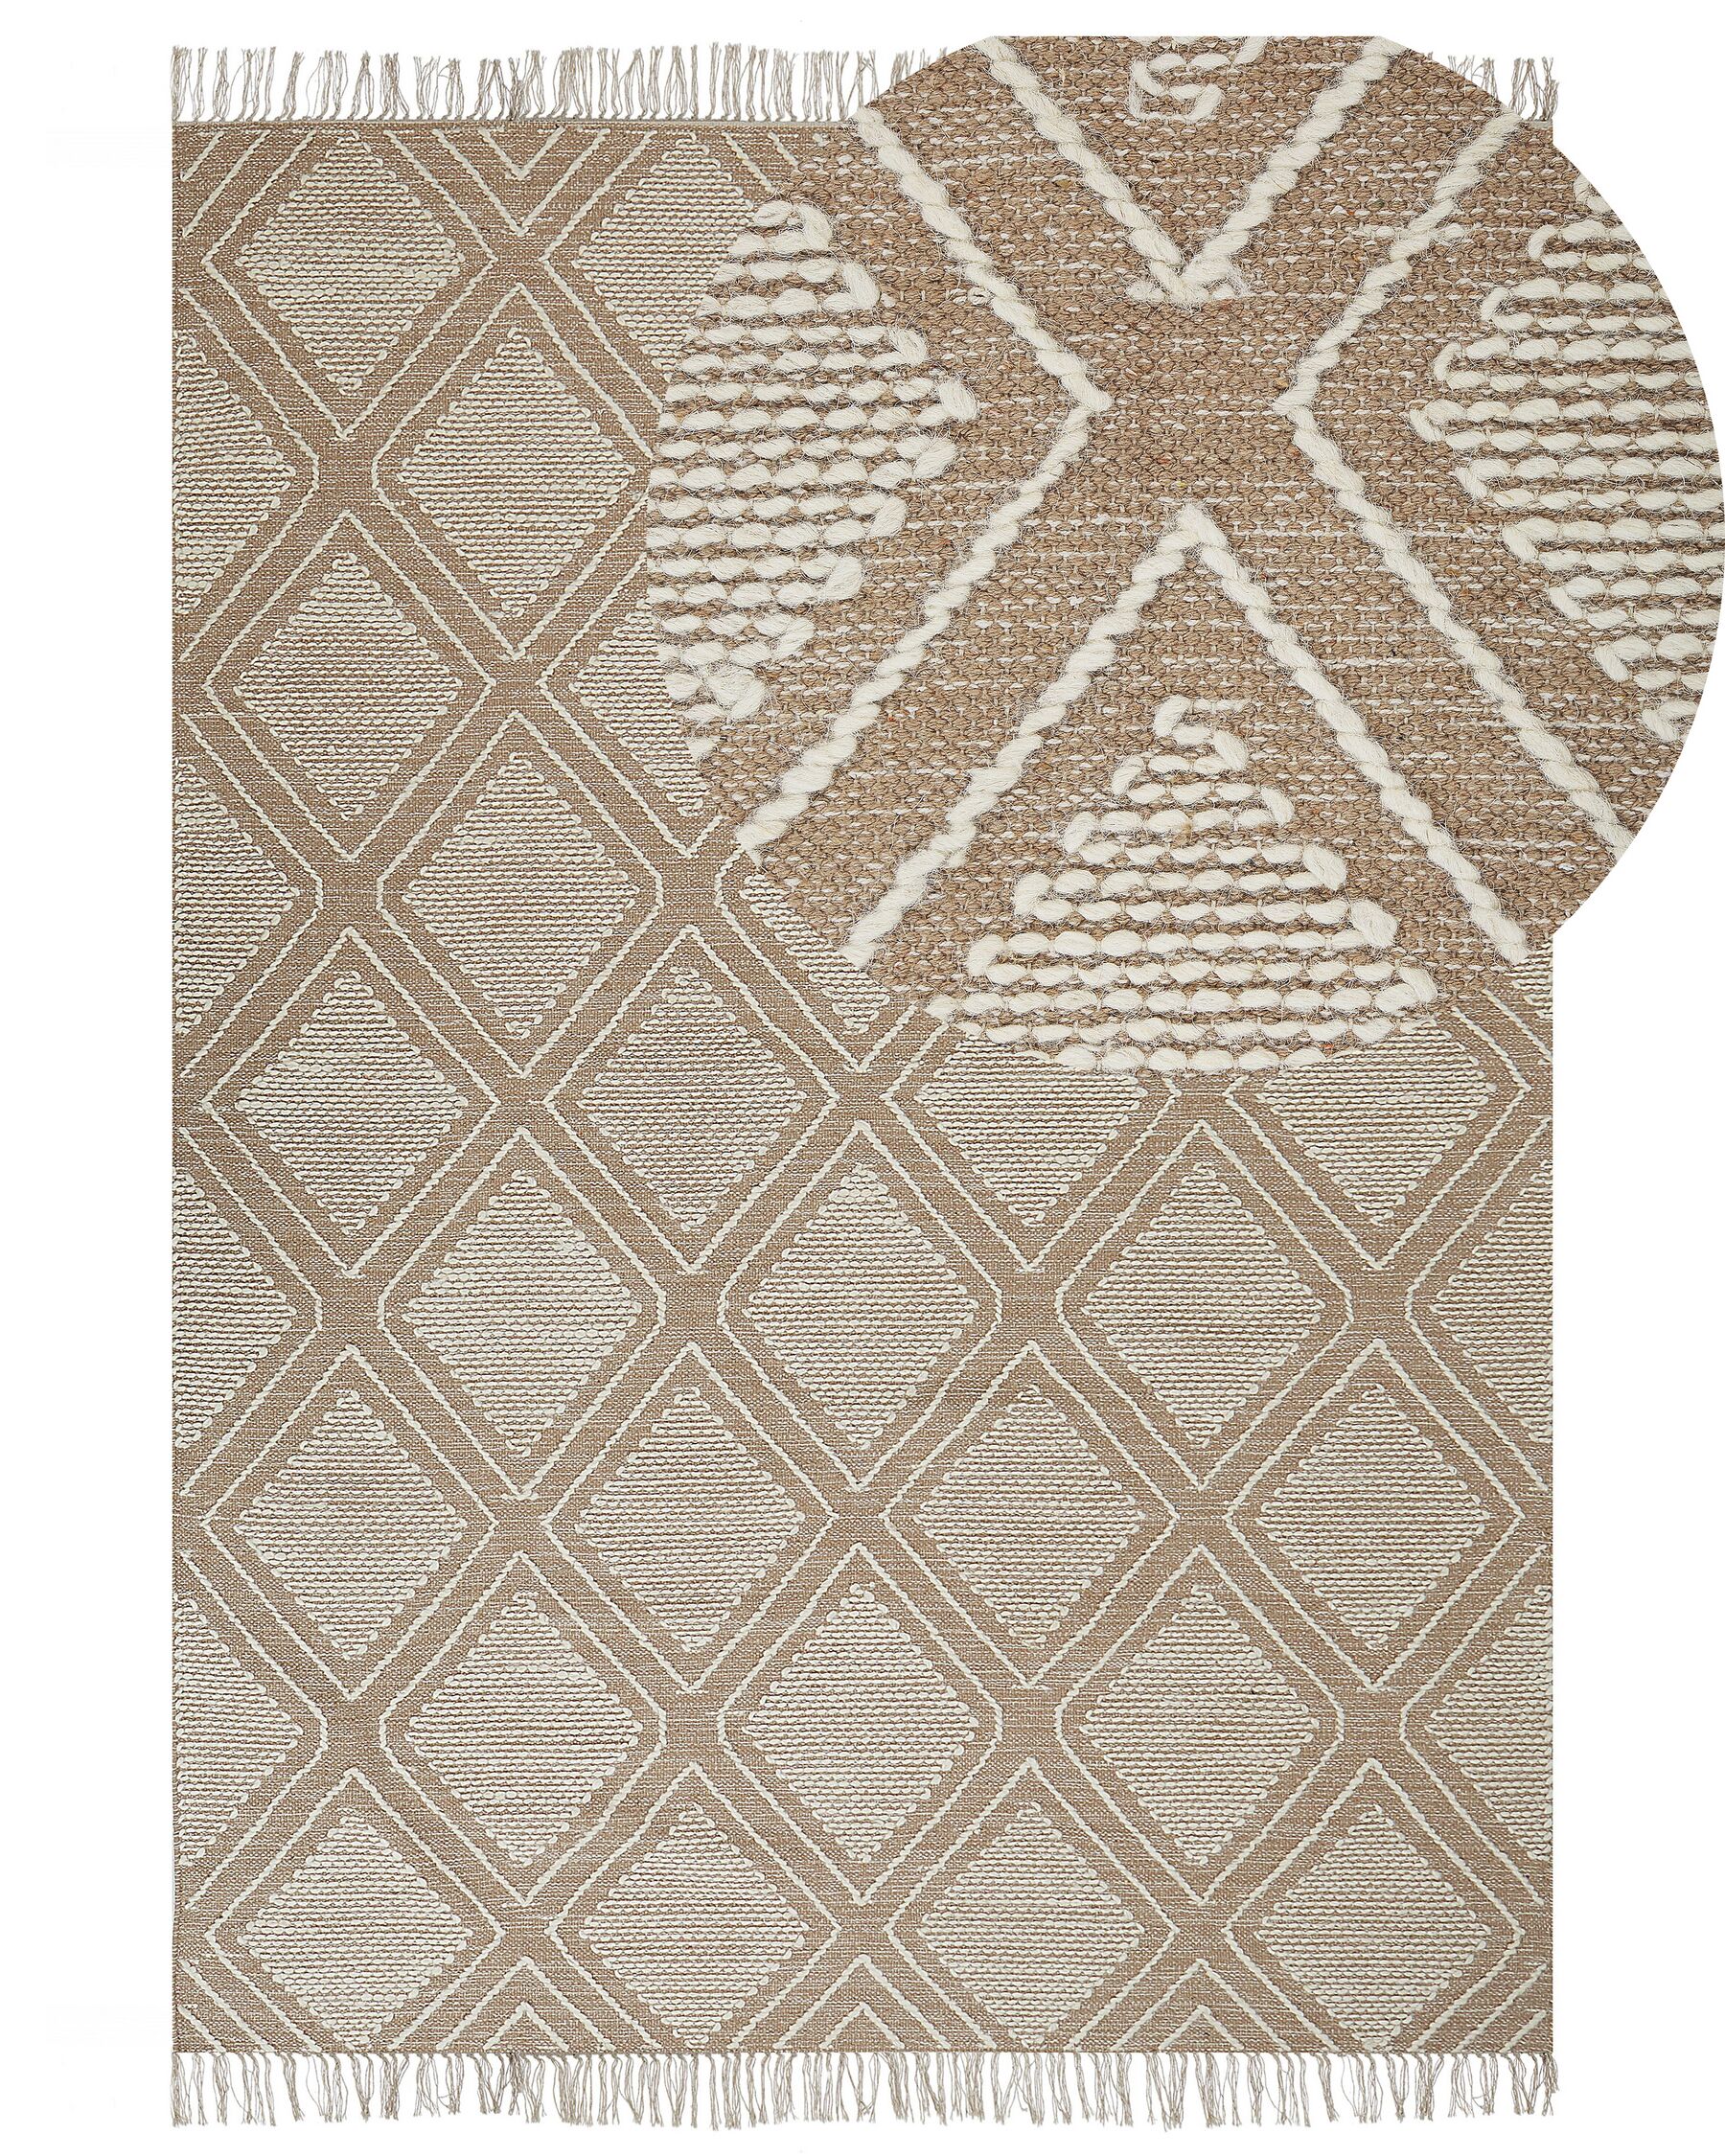 Cotton Area Rug 140 x 200 cm Beige and White KACEM_831140